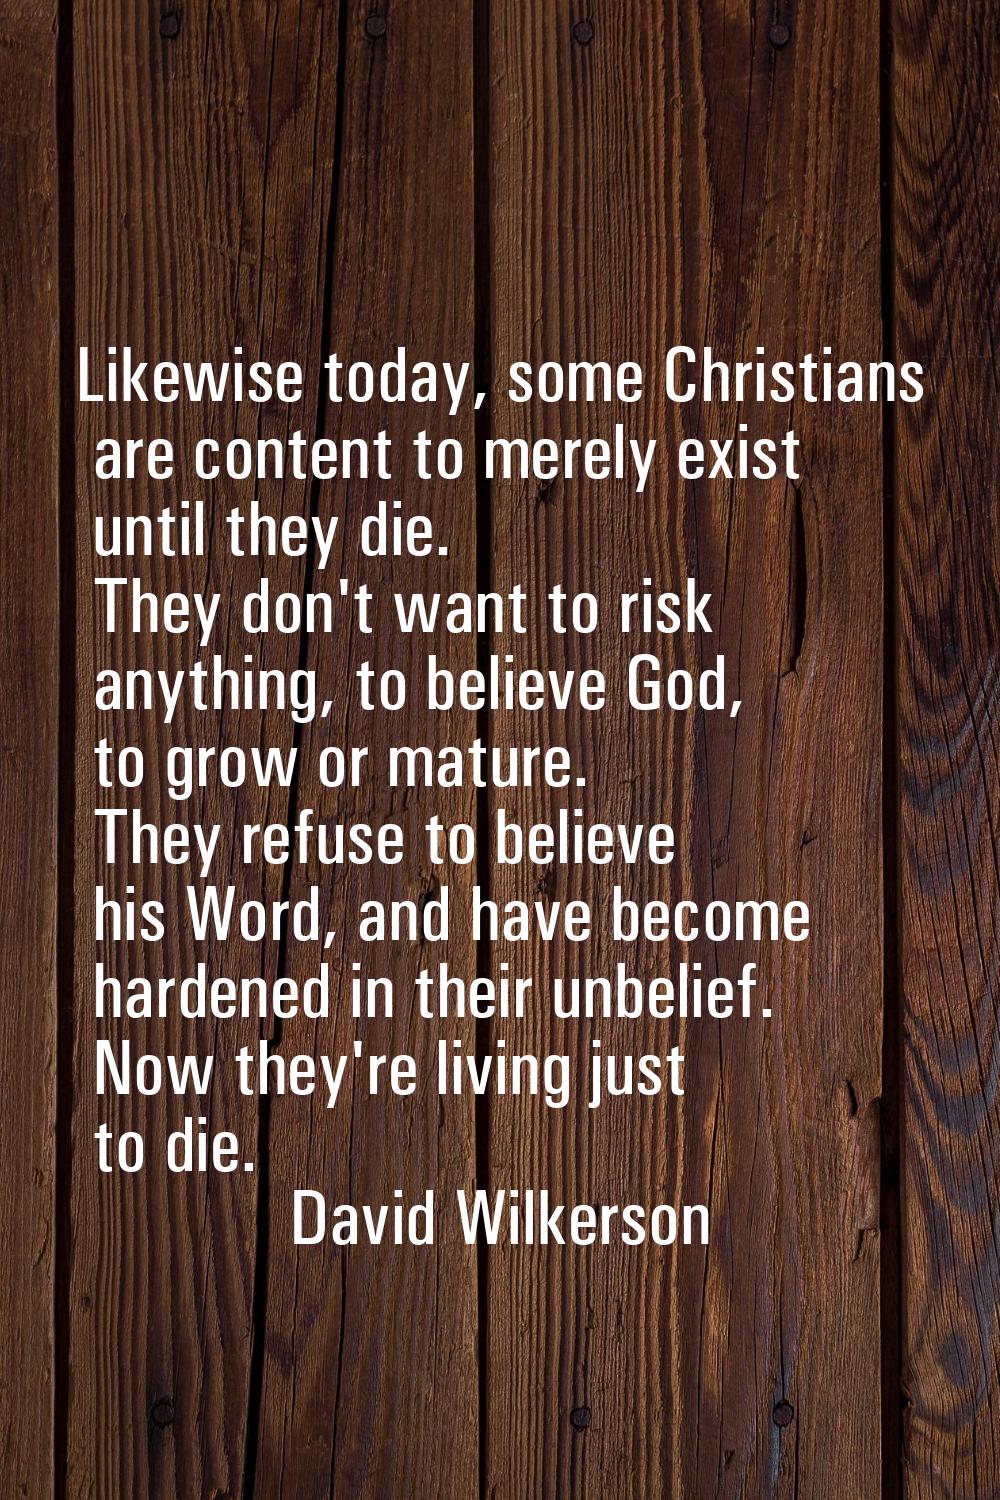 Likewise today, some Christians are content to merely exist until they die. They don't want to risk